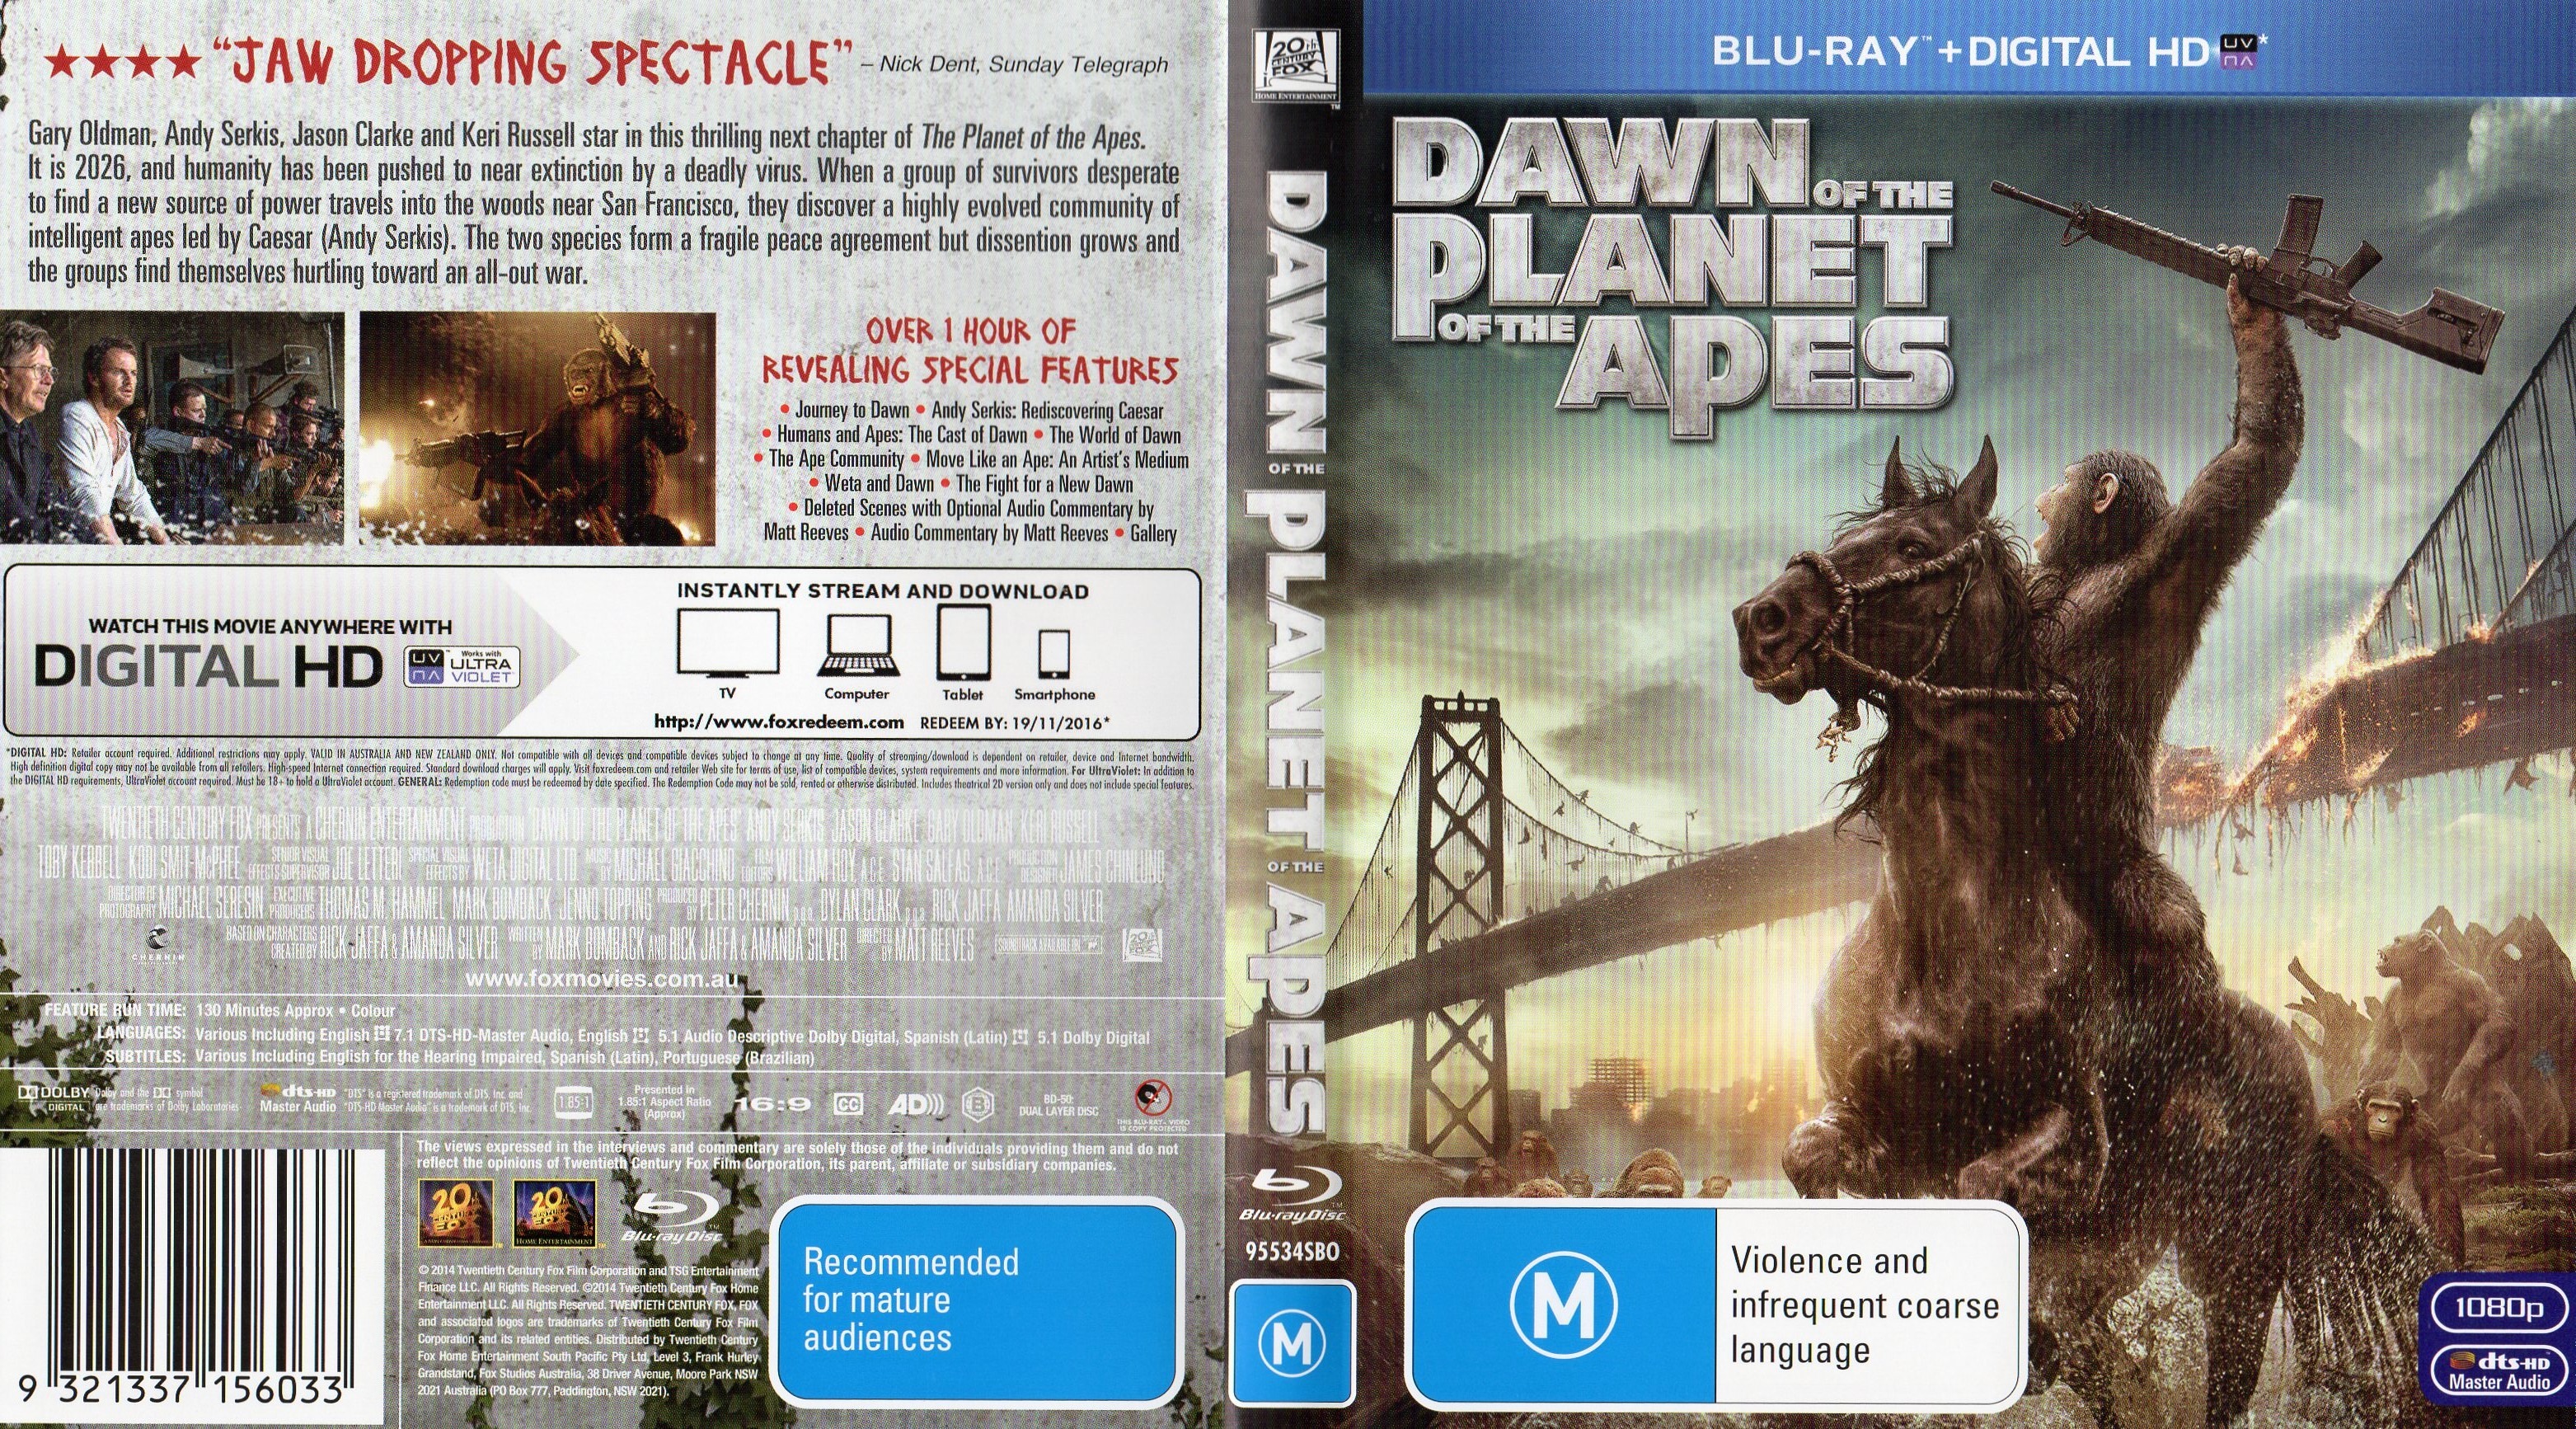 rise of the planet of the apes dvd cover